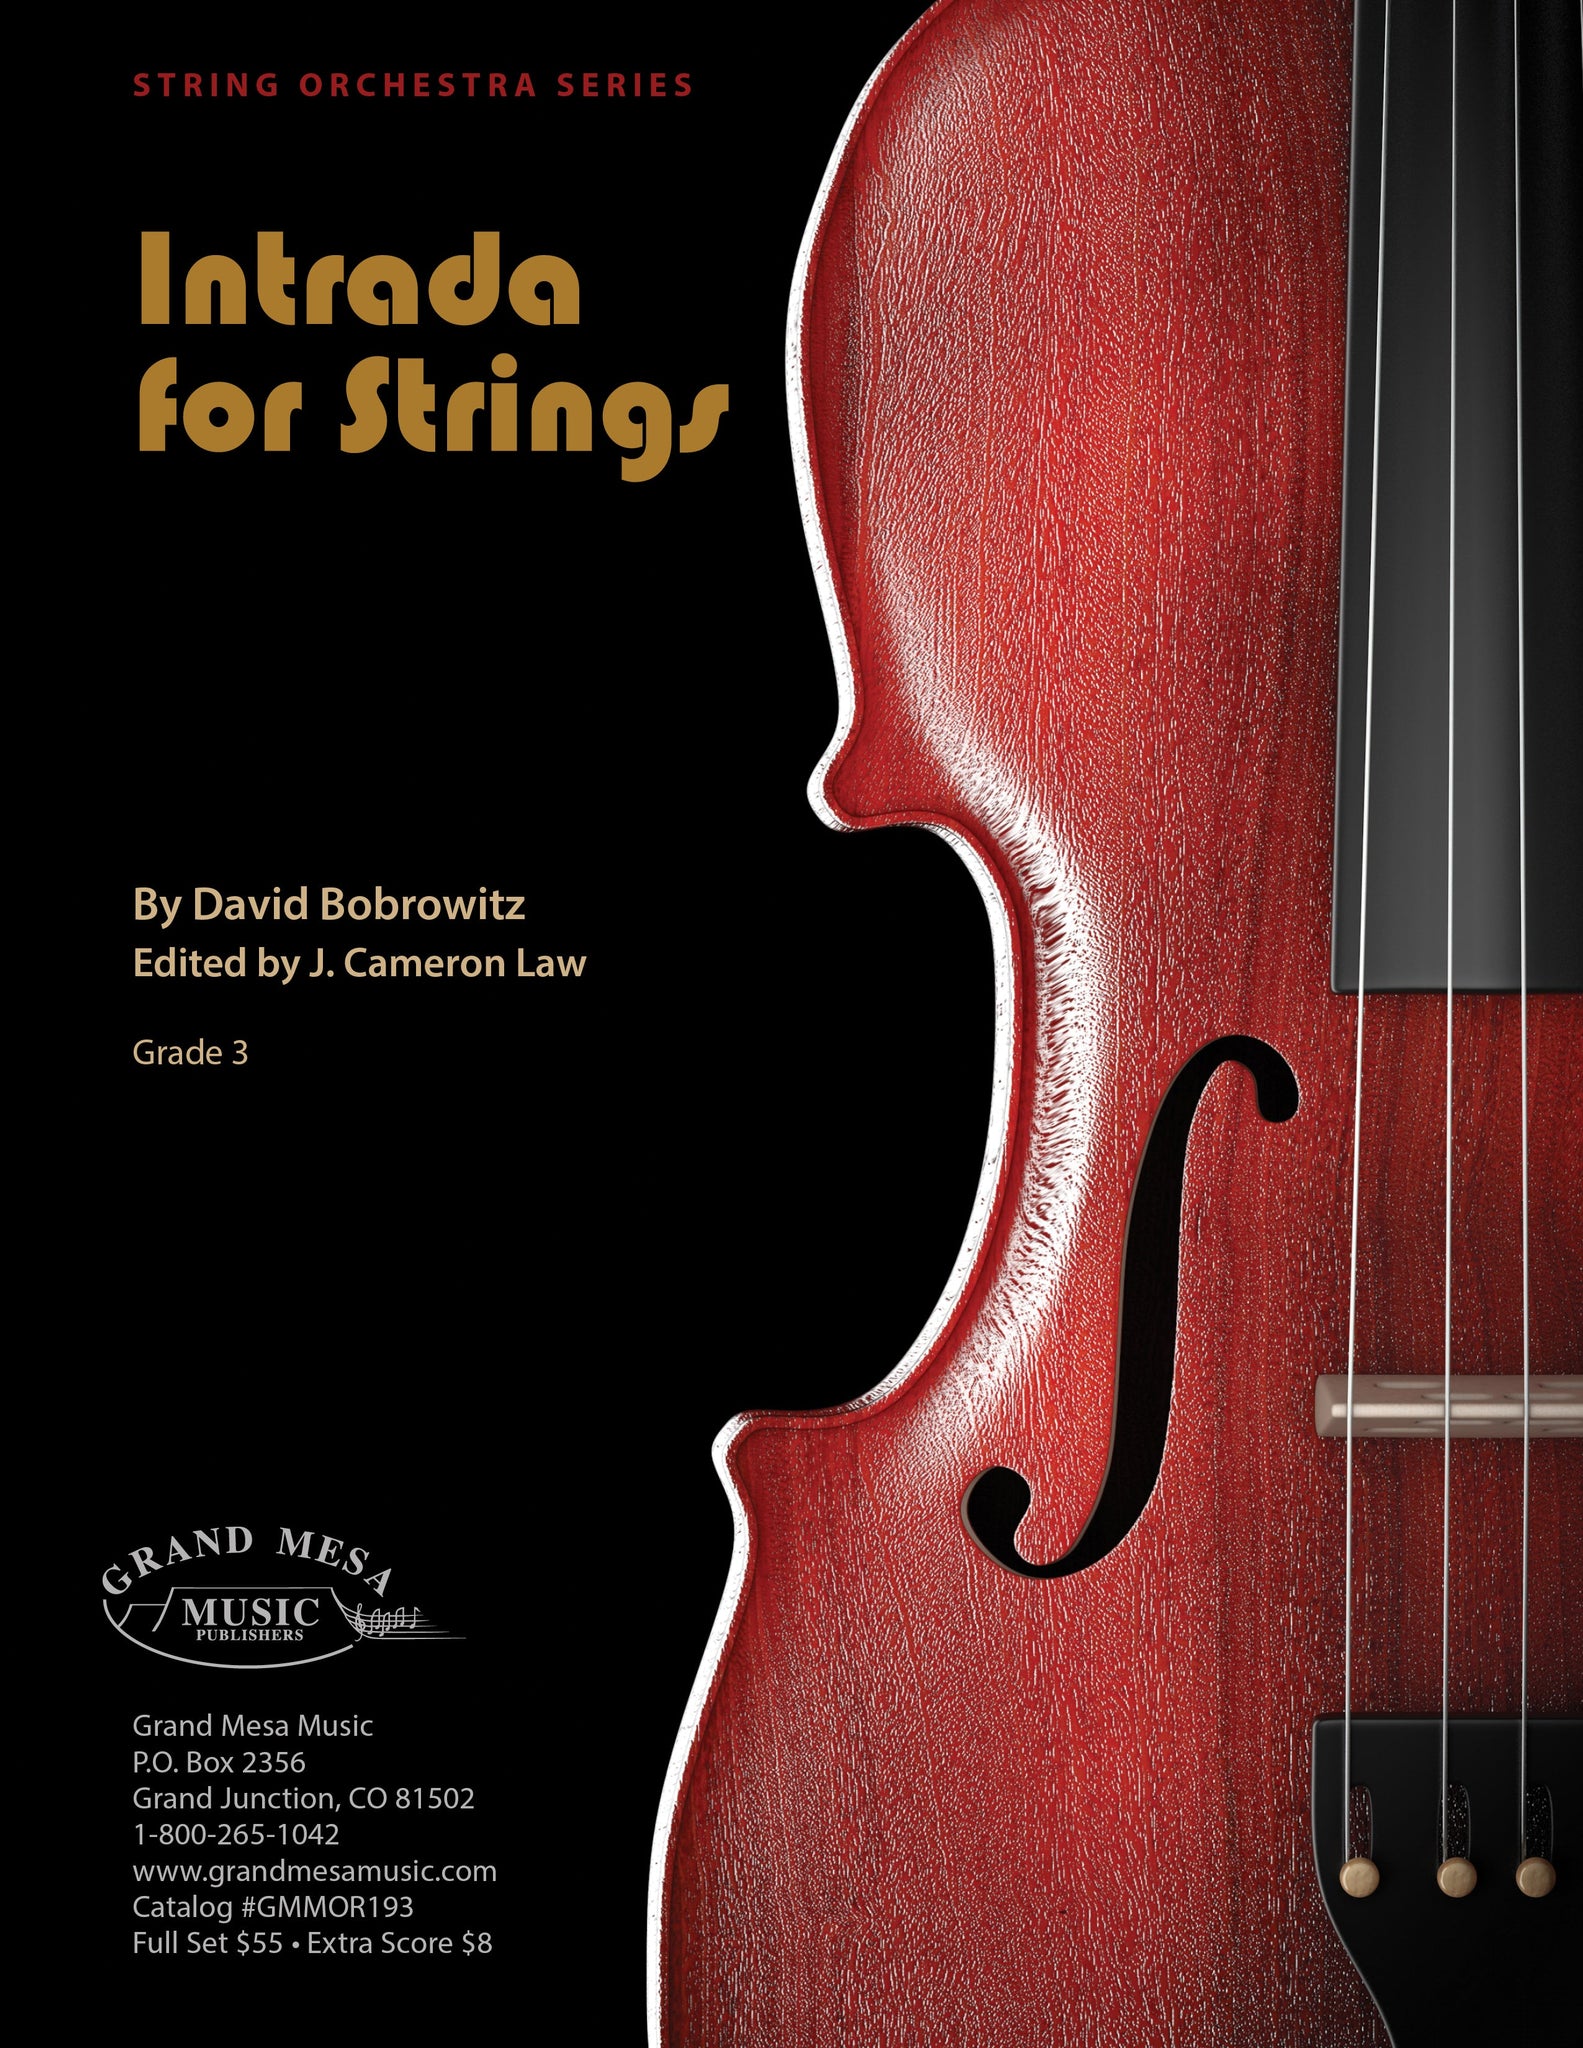 Strings sheet music cover of Intrada for Strings, composed by David Bobrowitz.